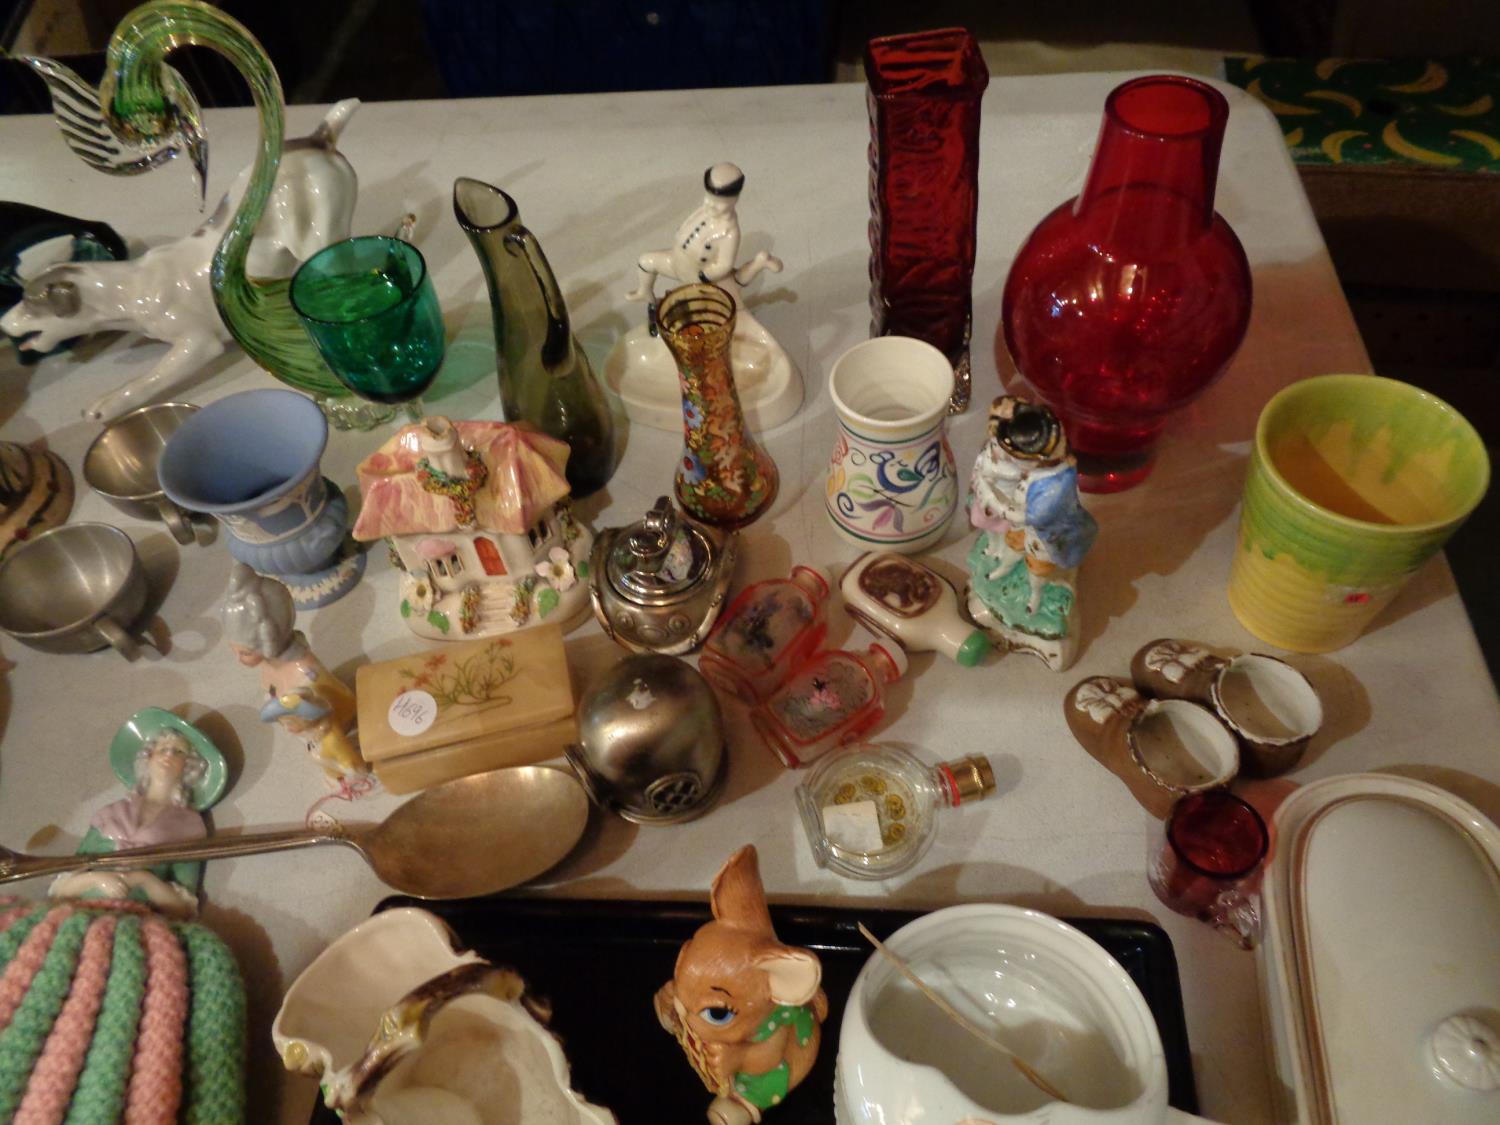 A MIXED SELECTION OF ITEMS TO INCLUDE SMALL VASES, A TRINKET TRAY AND SOME CERAMIC ITEMS - Image 4 of 5